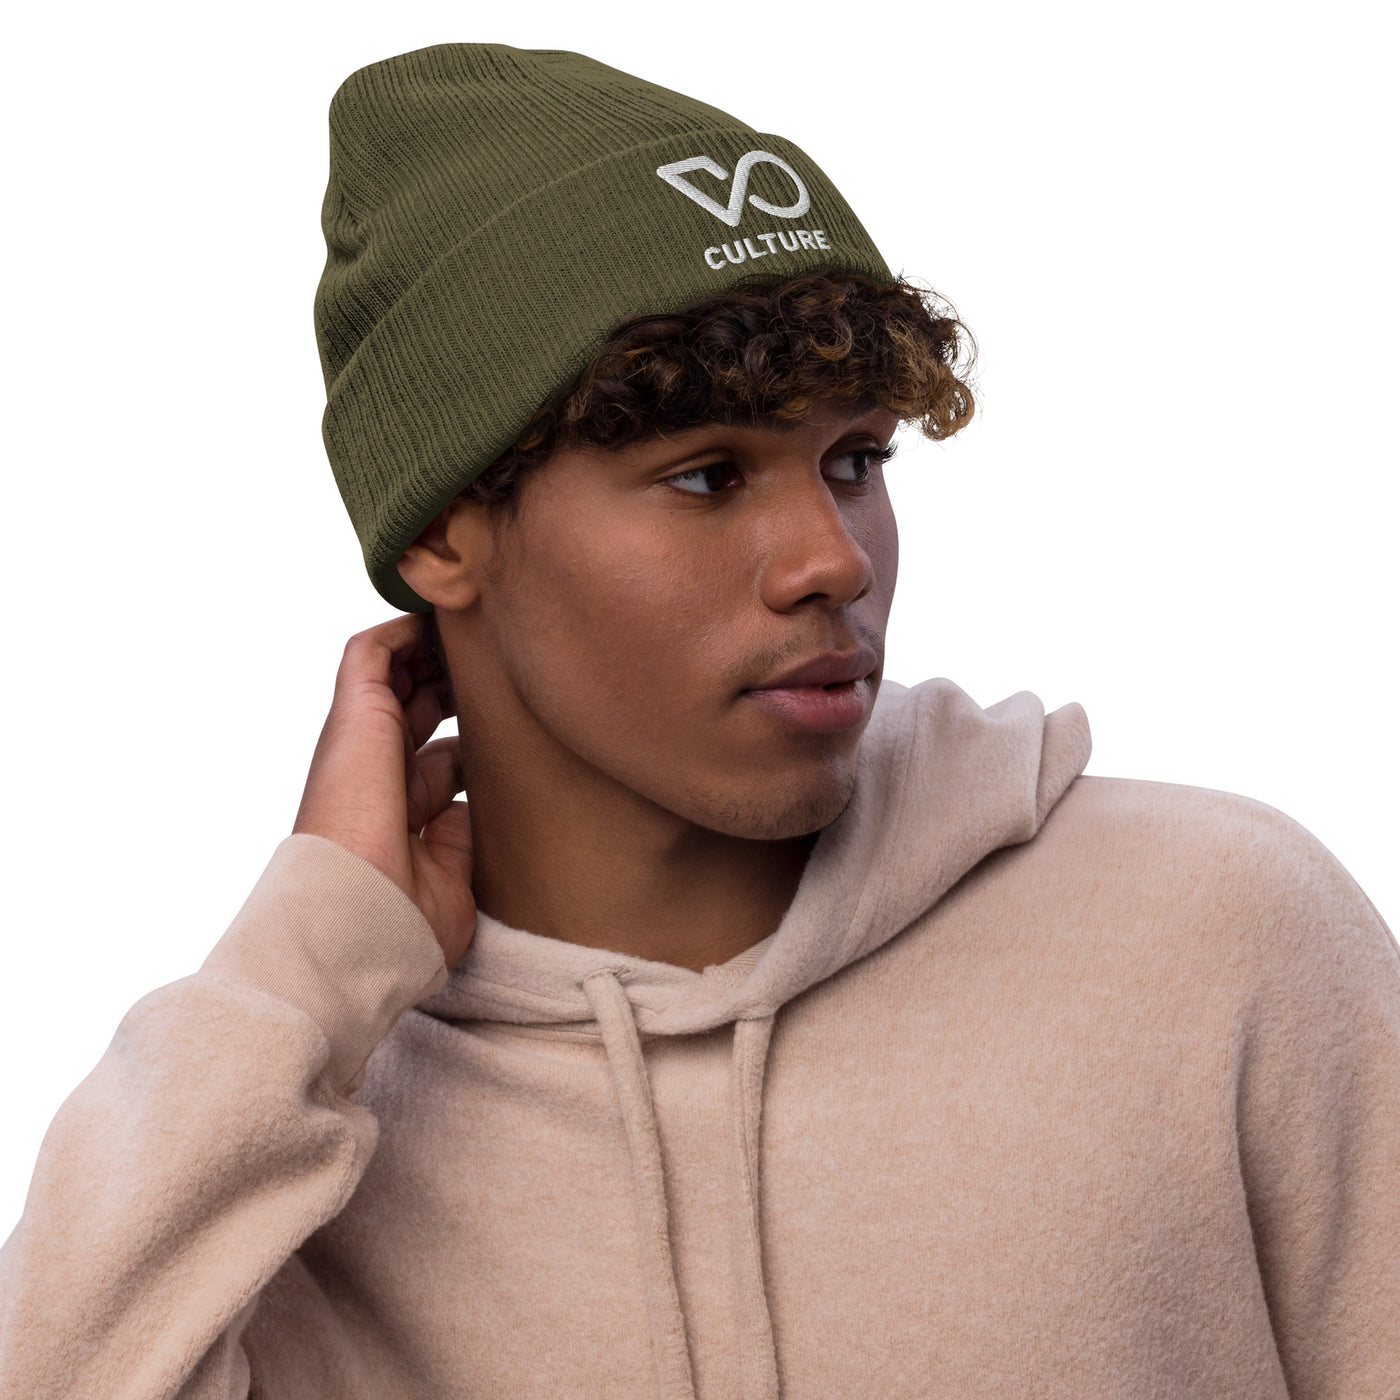 VO CULTURE Ribbed knit beanie